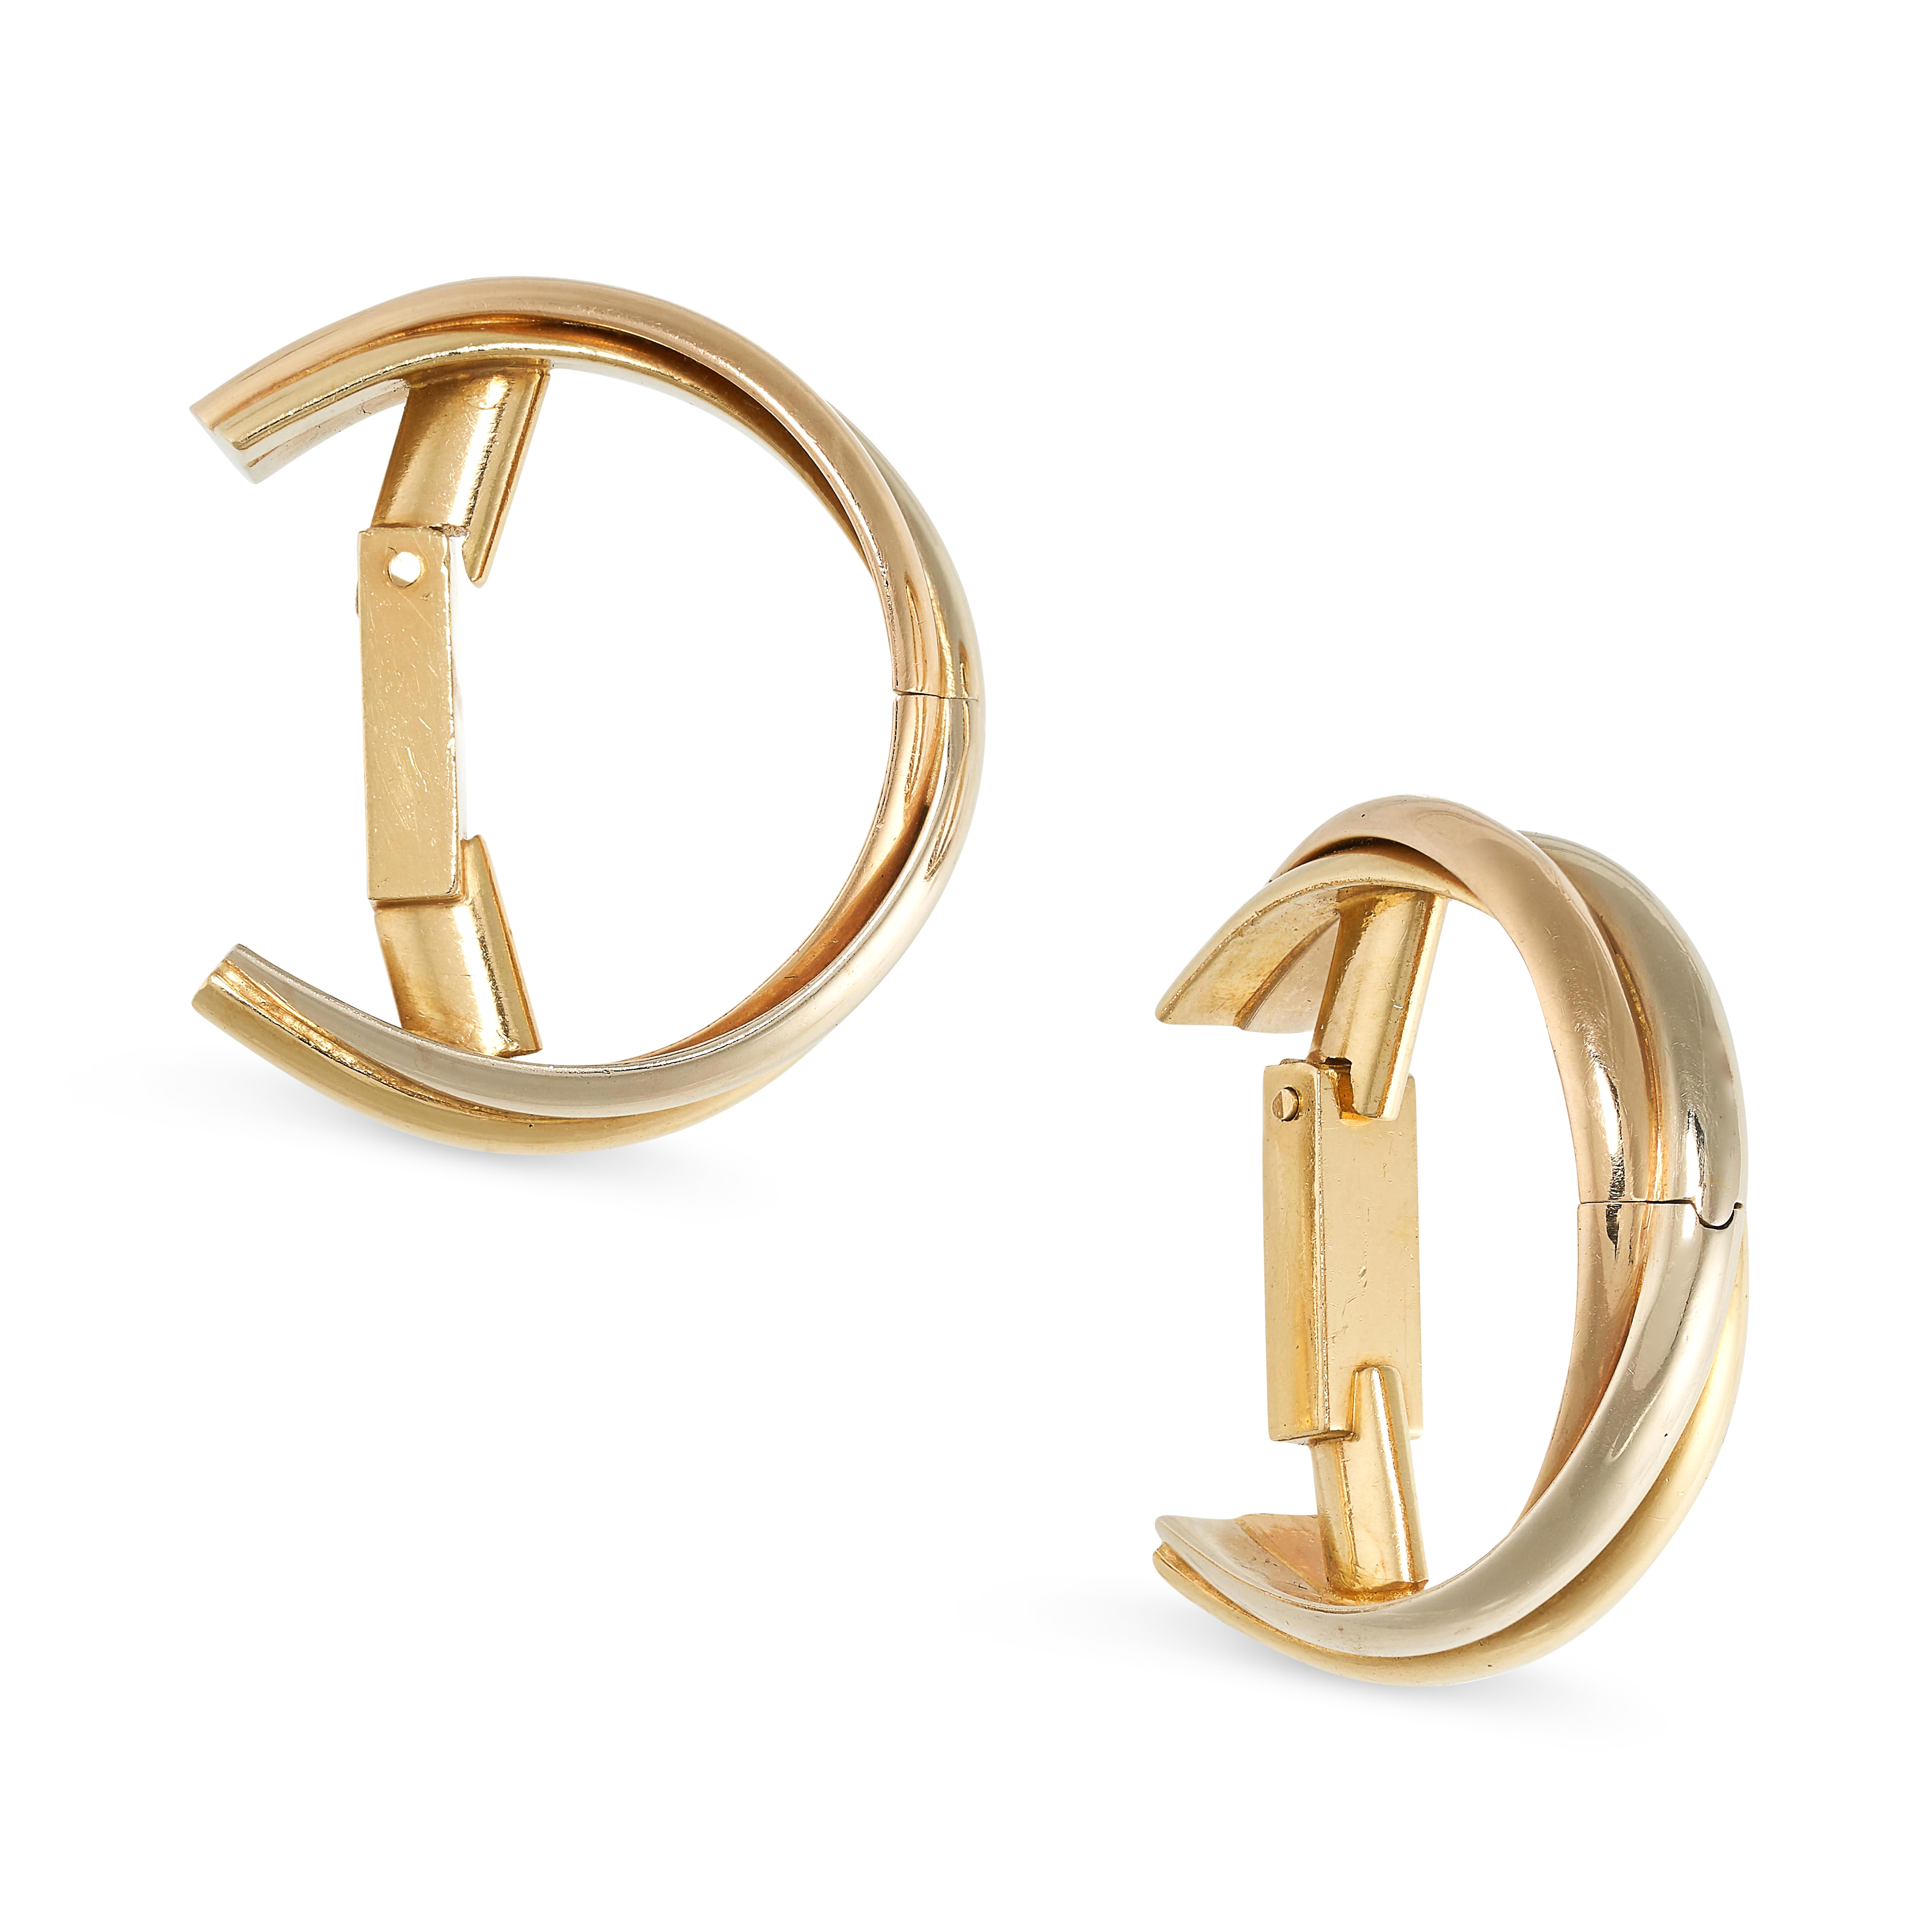 CARTIER, A PAIR OF TRINITY CUFFLINKS in 18ct yellow, white and rose gold, in tri-colour design,